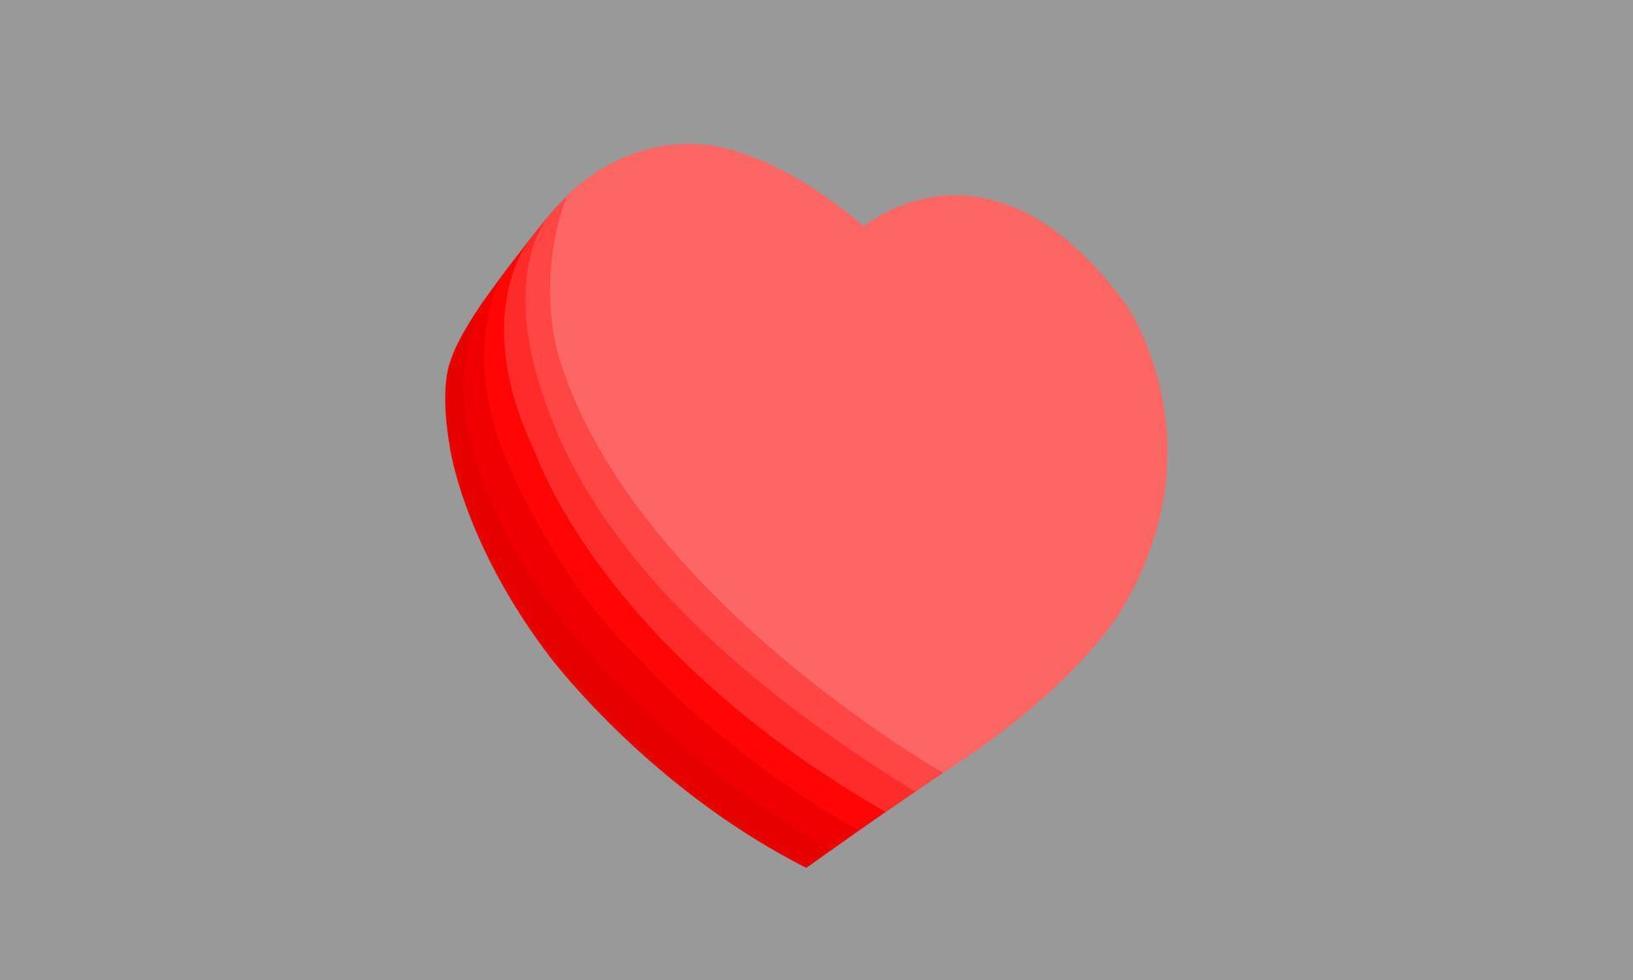 The red heart plate is layered in layers. Show side view,heart thickness. Illustration on a gray background. vector